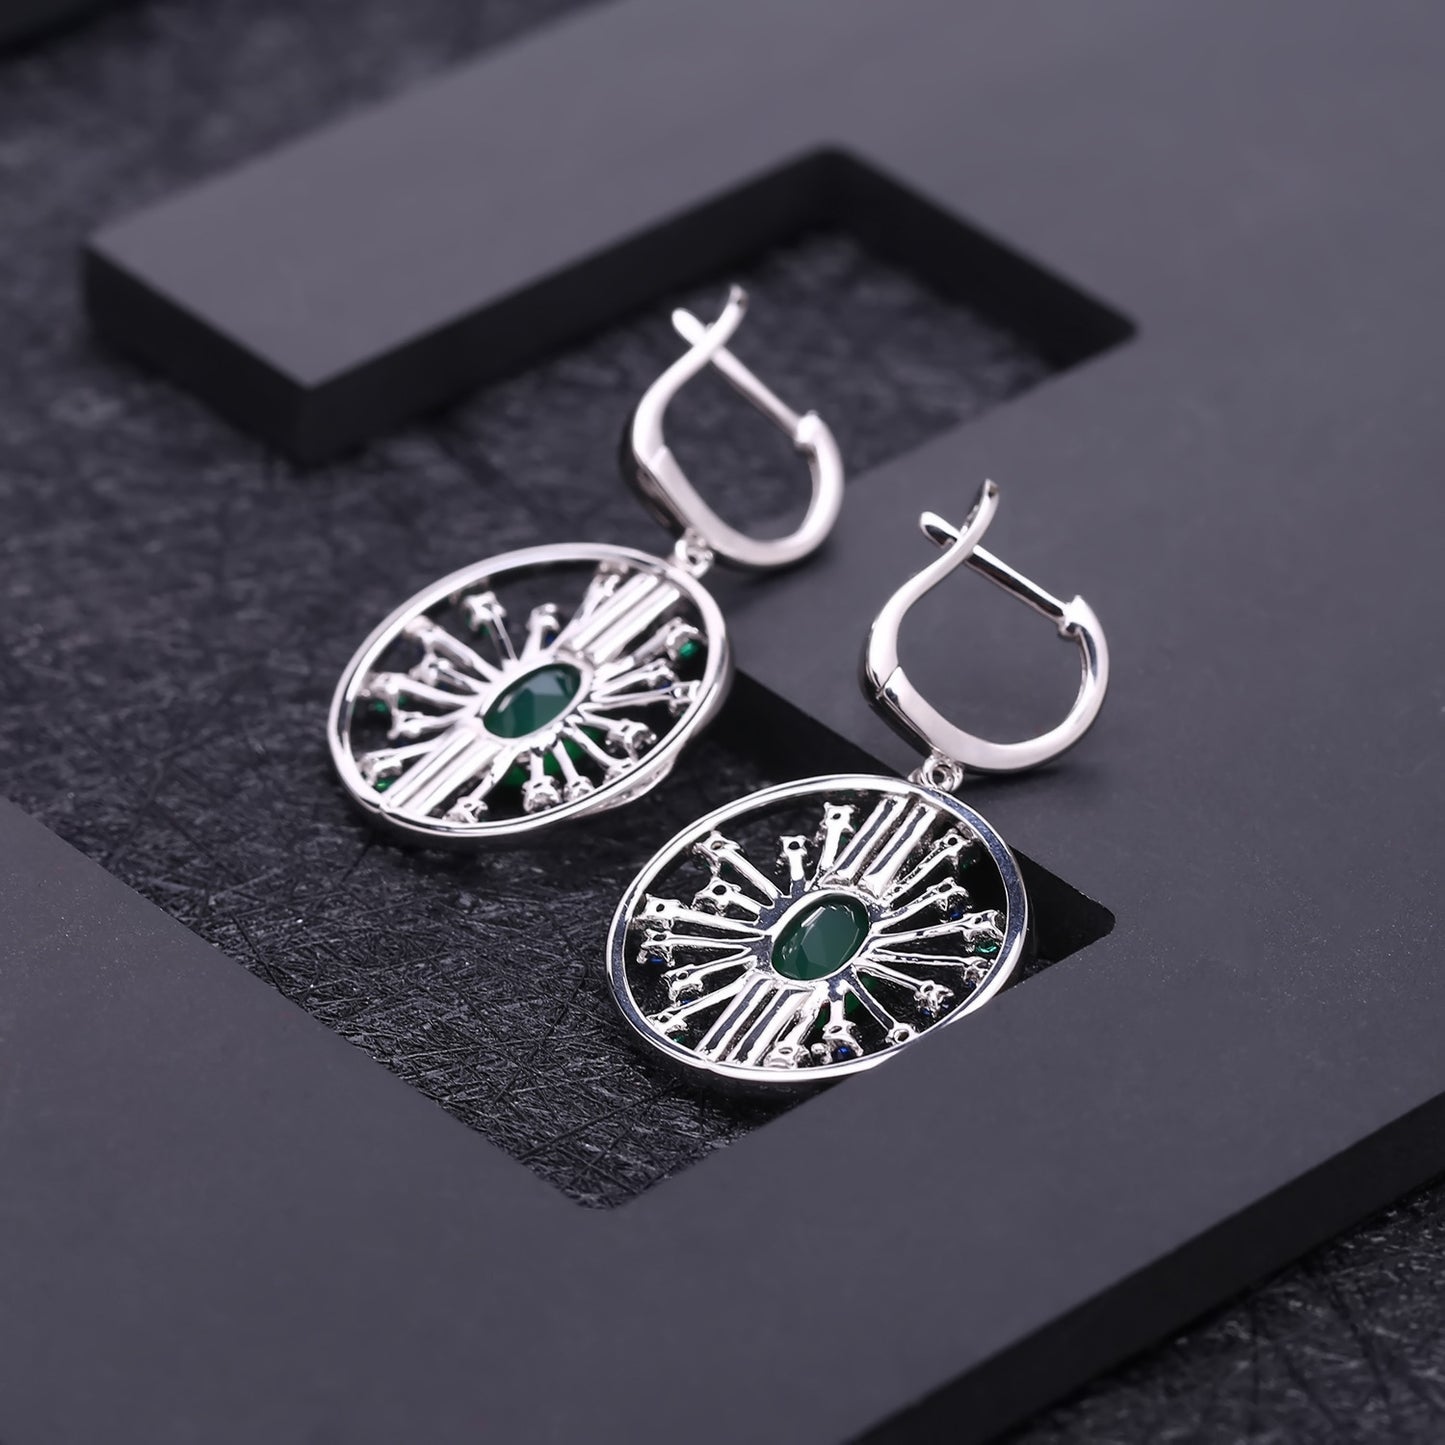 Luxury Fashion Design Inlaid Green Agate Circle Sterling Silver Drop Earrings for Women